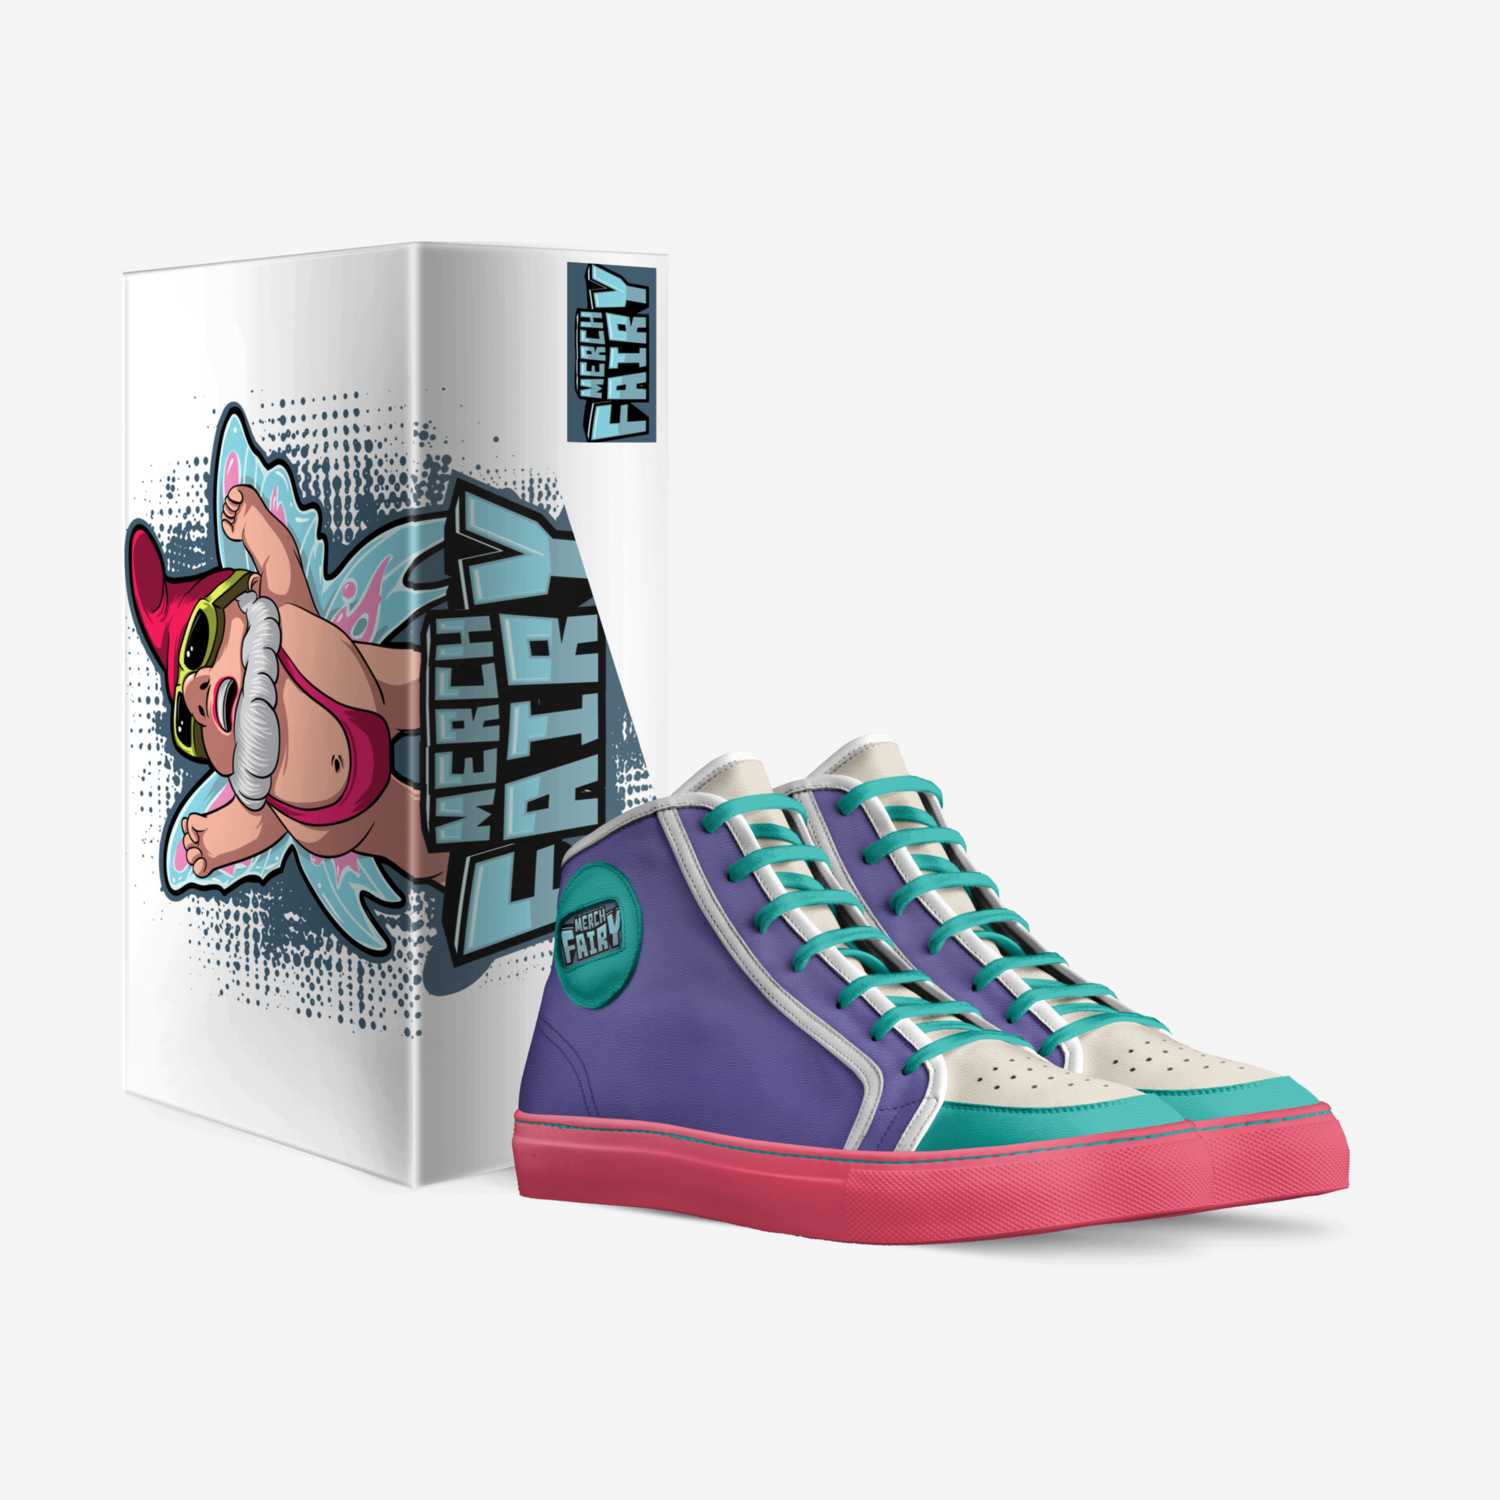 Merch Fairy custom made in Italy shoes by Ken Reil | Box view